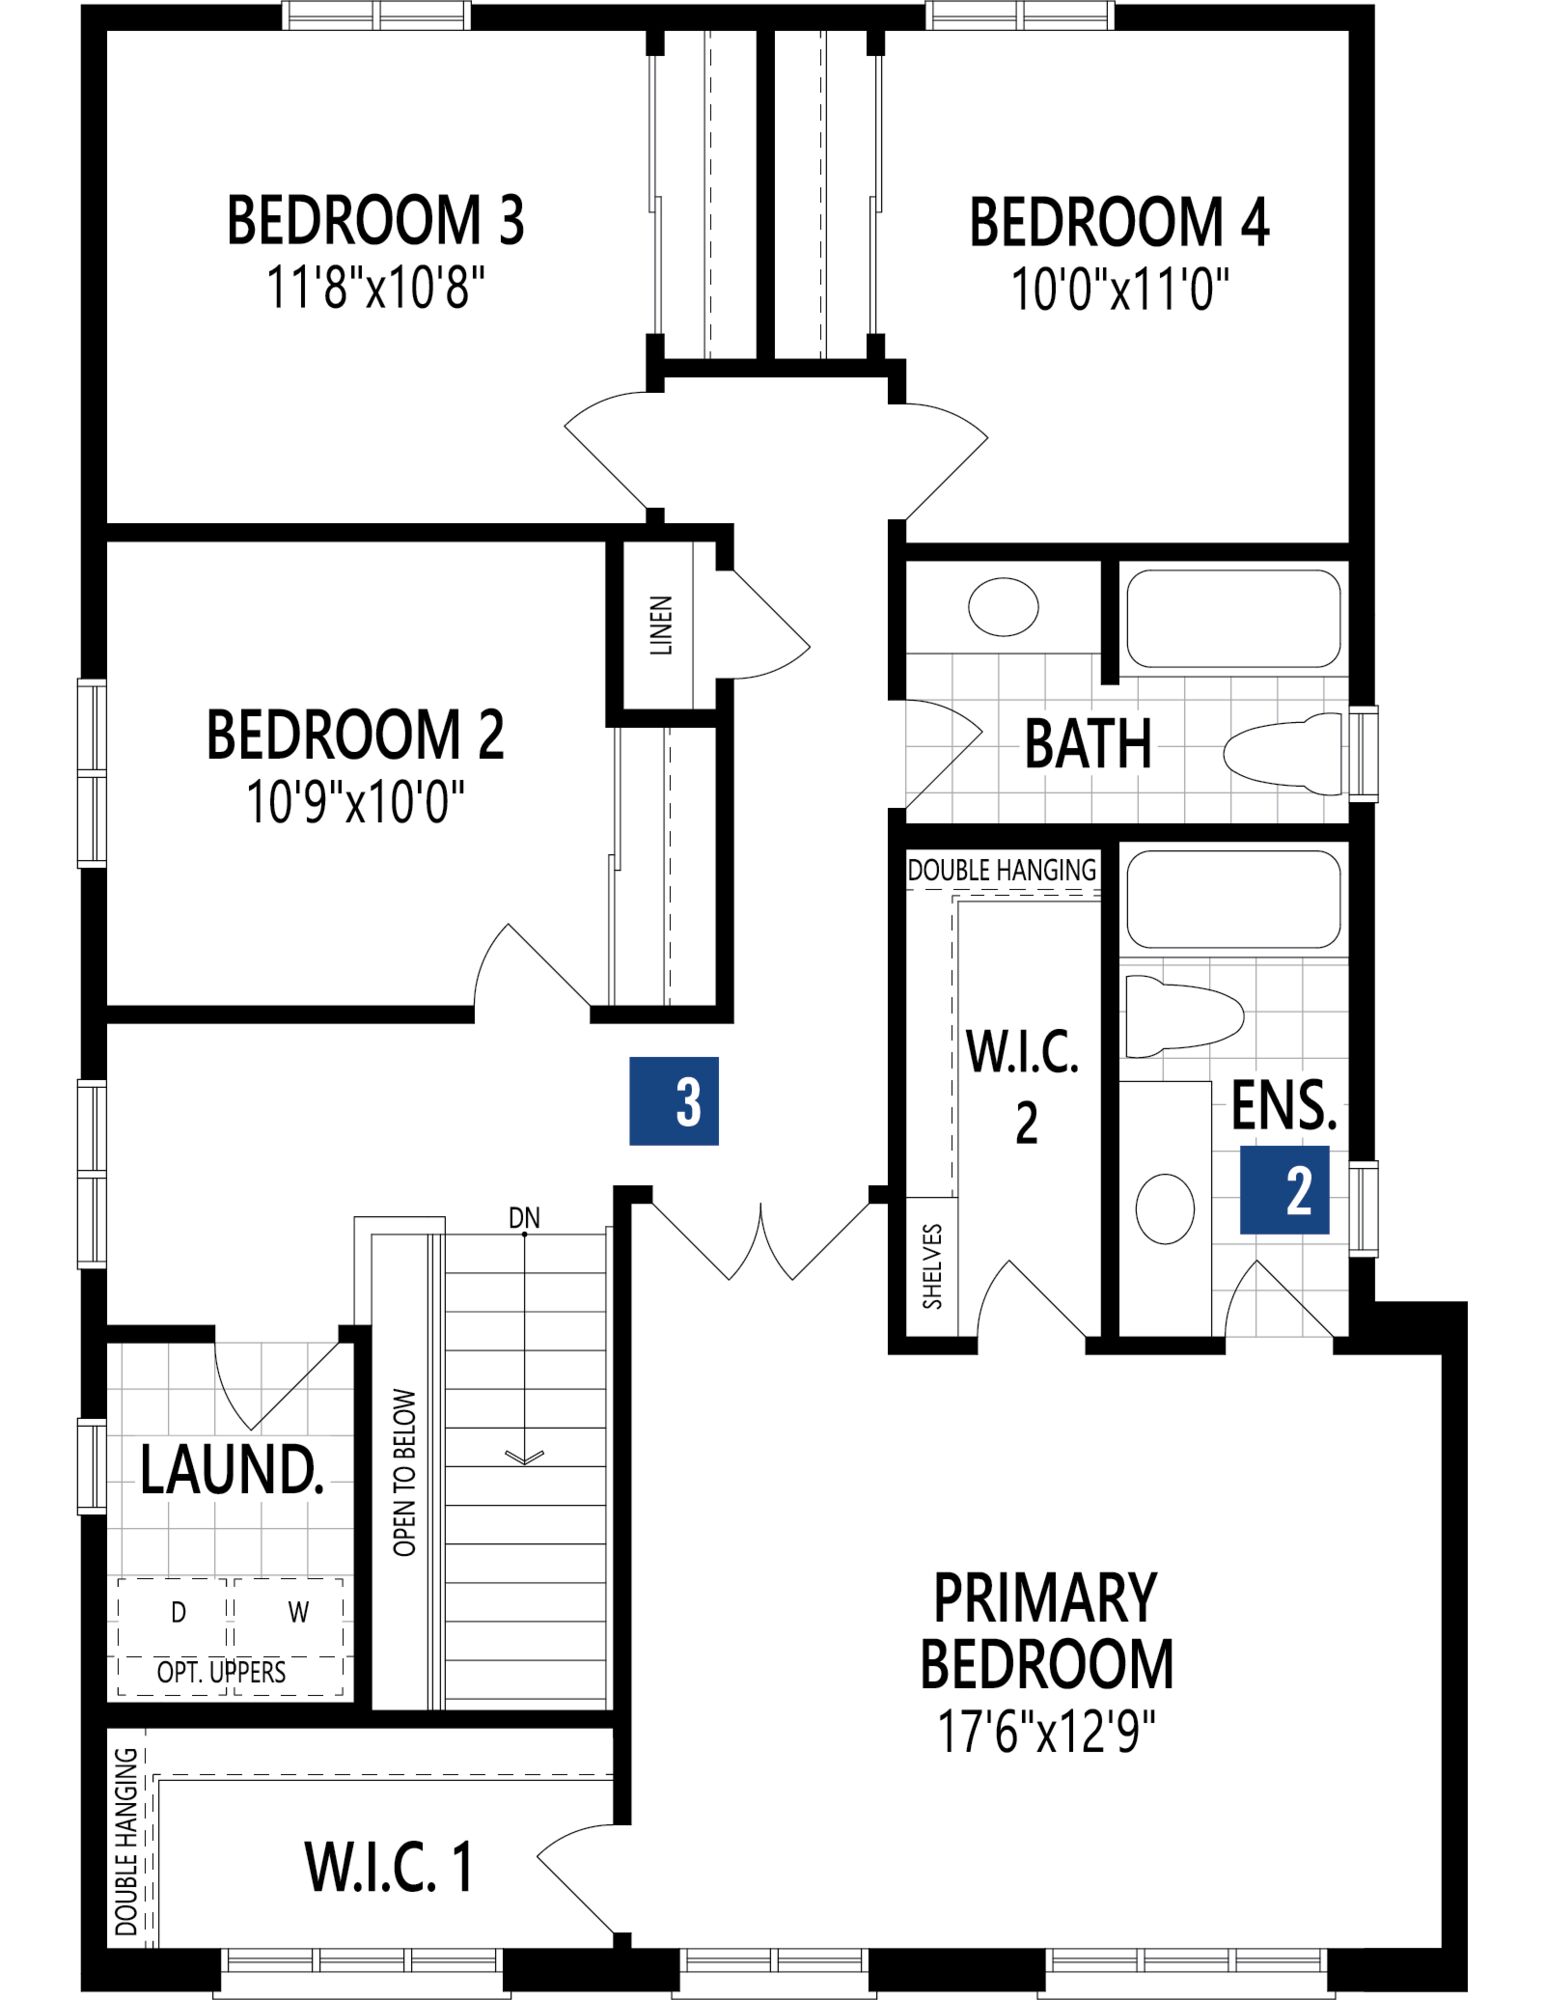 Magnolia Floor Plan of Half Moon Bay Towns with undefined beds